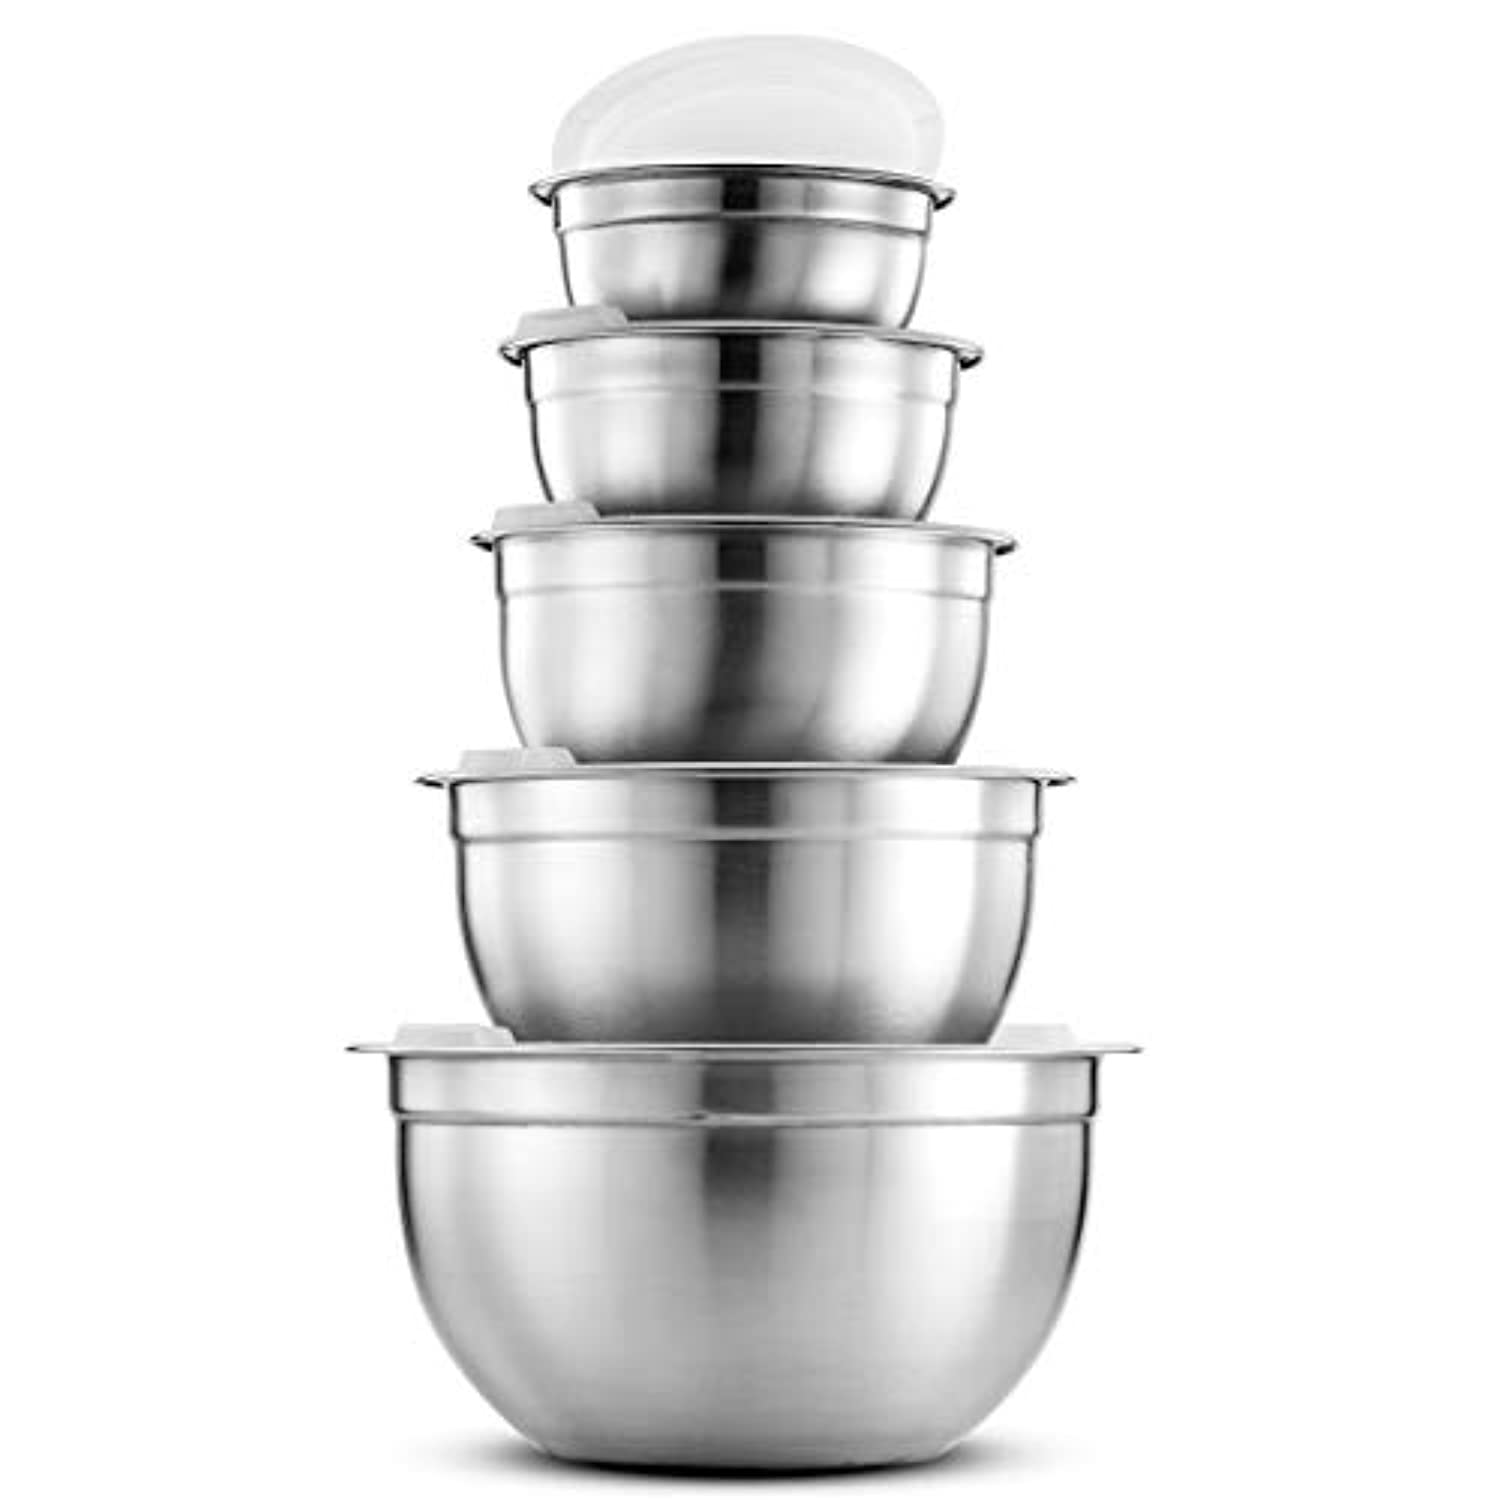 Set Of 5 Colorful Coating Stainless Steel Mixing Bowls With Lids